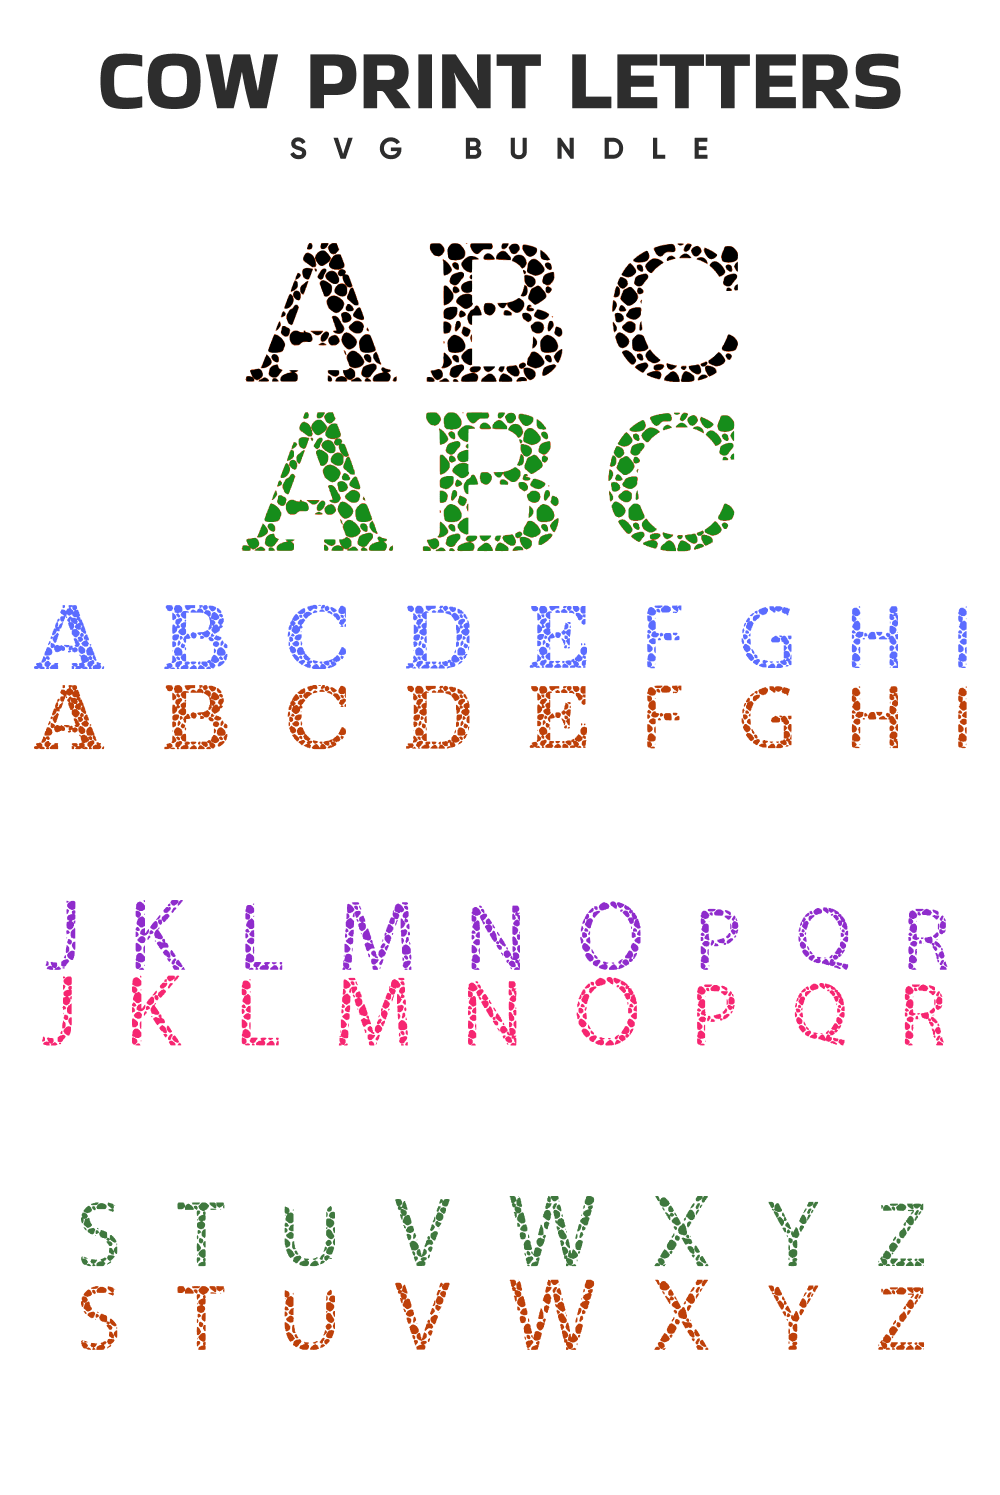 The alphabet is decorated with cow spots.